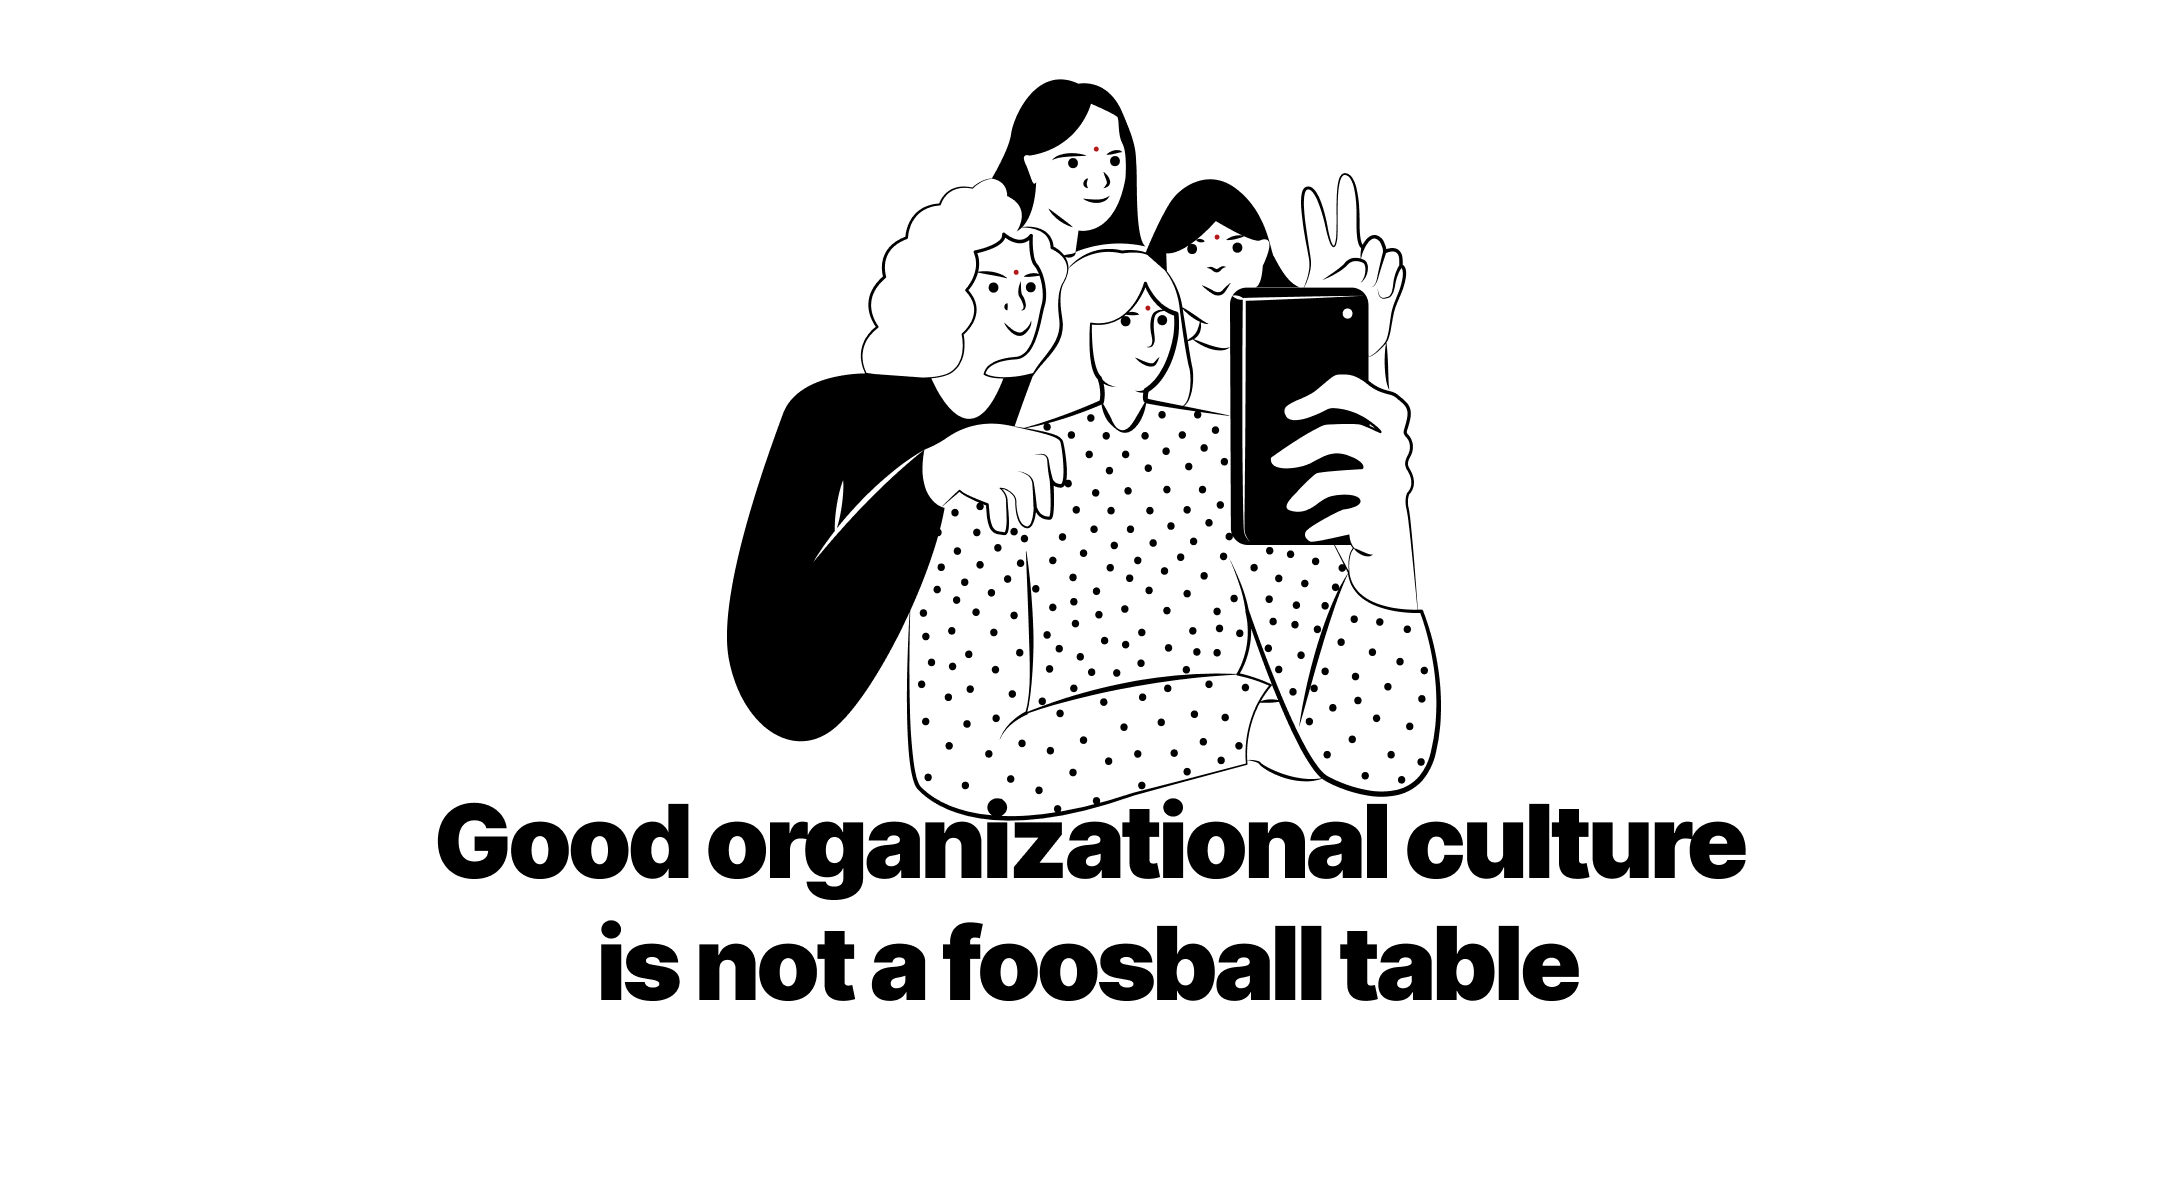 Good organizational culture is not a foosball table